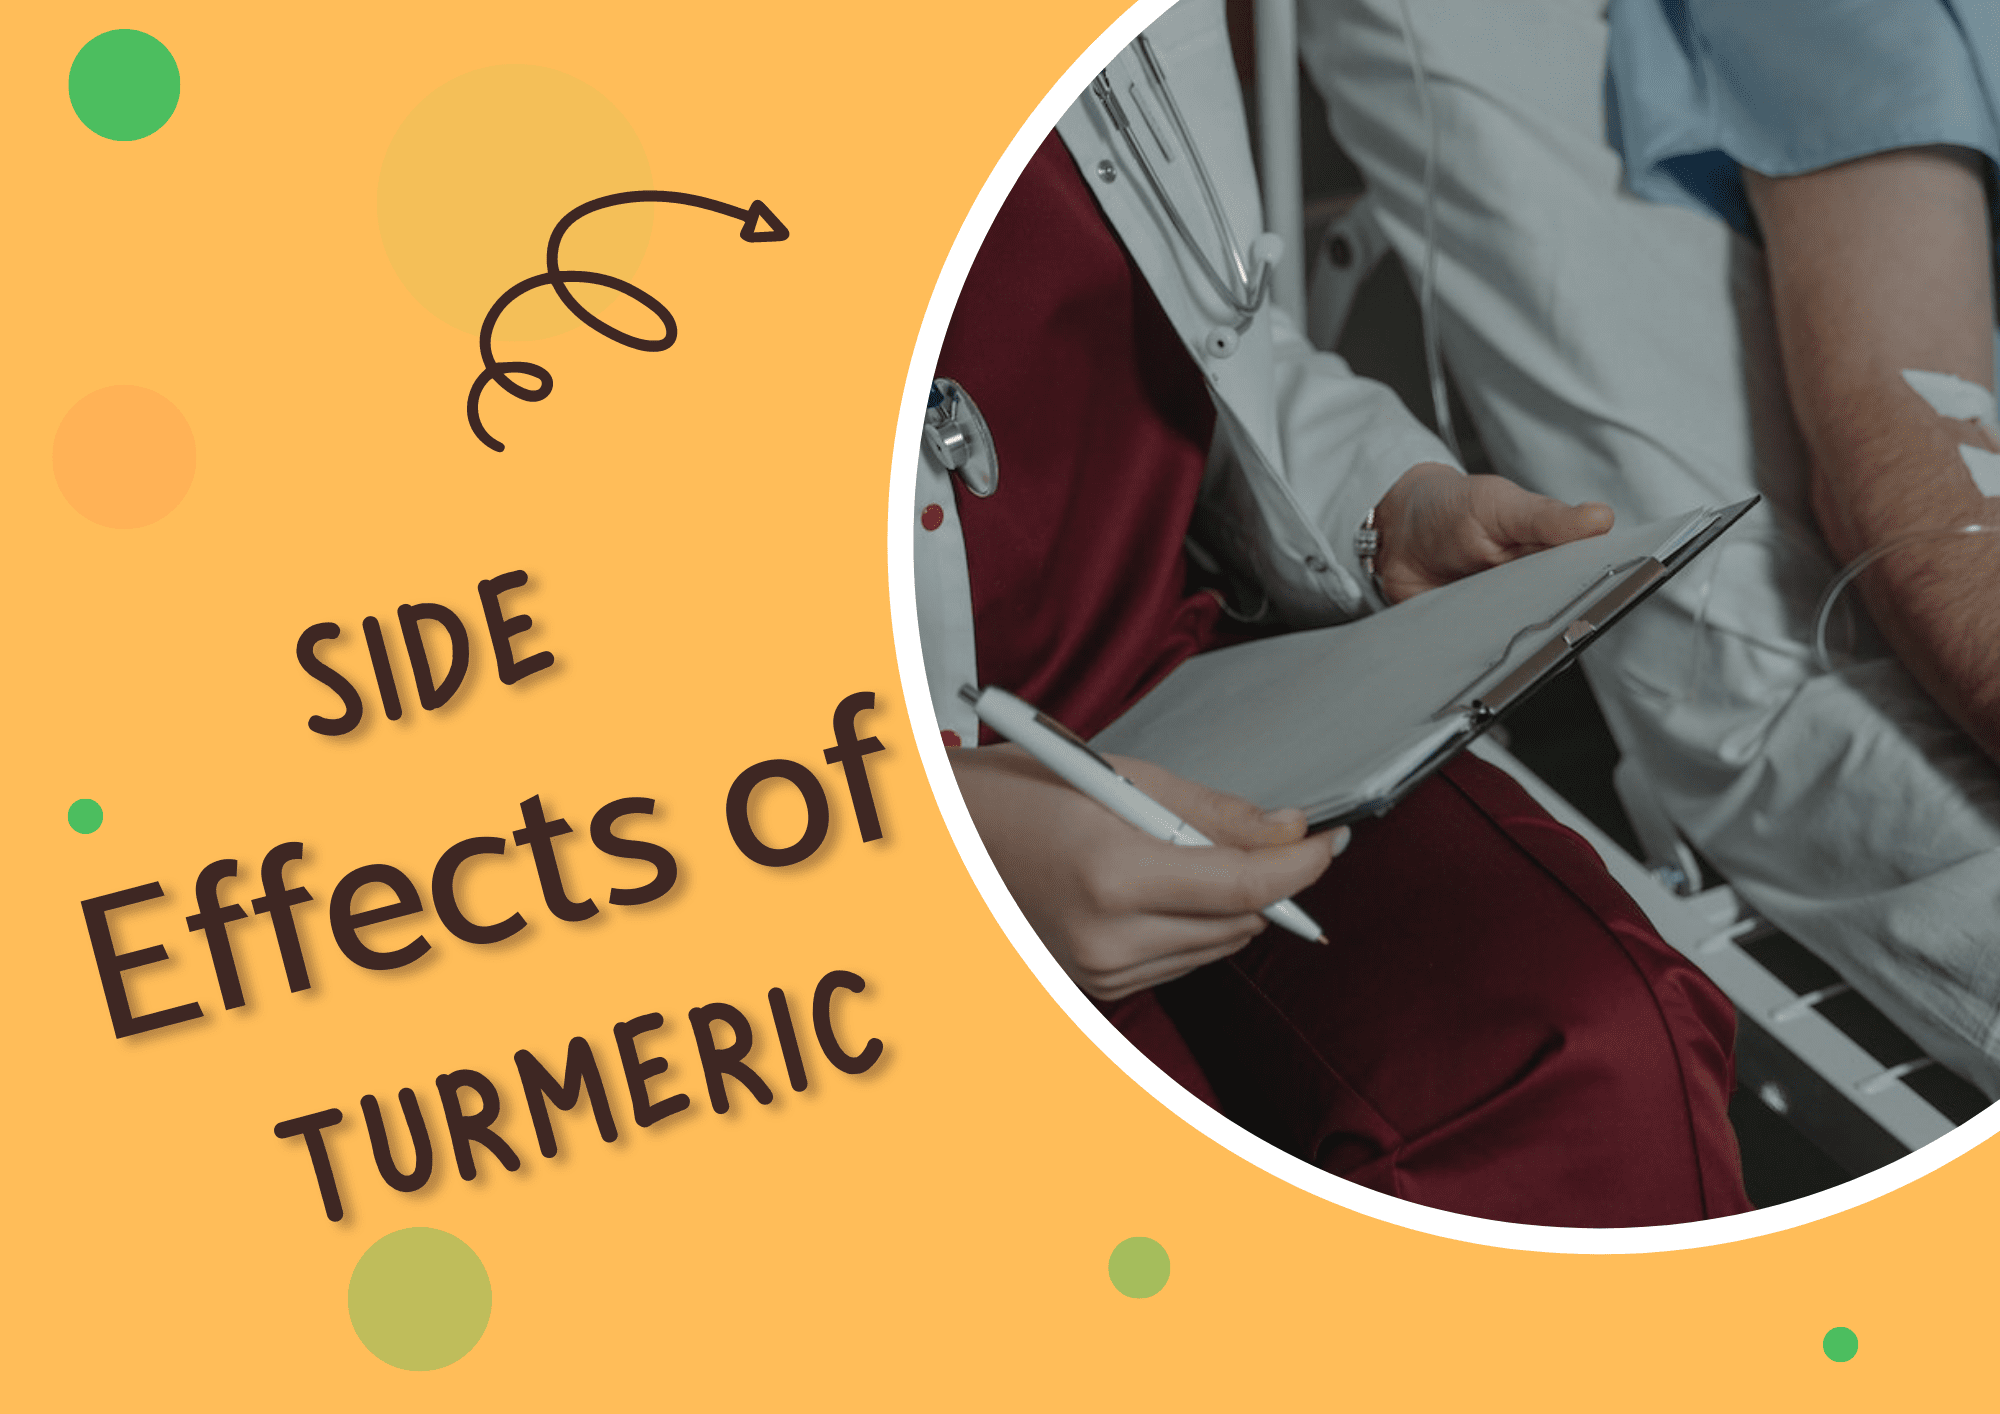 10 Serious Side Effects Turmeric. While turmeric is generally considered safe and well-tolerated, some potential side effects exist. These can include stomach upset, decreased absorption of iron, and an increased risk of kidney stones.